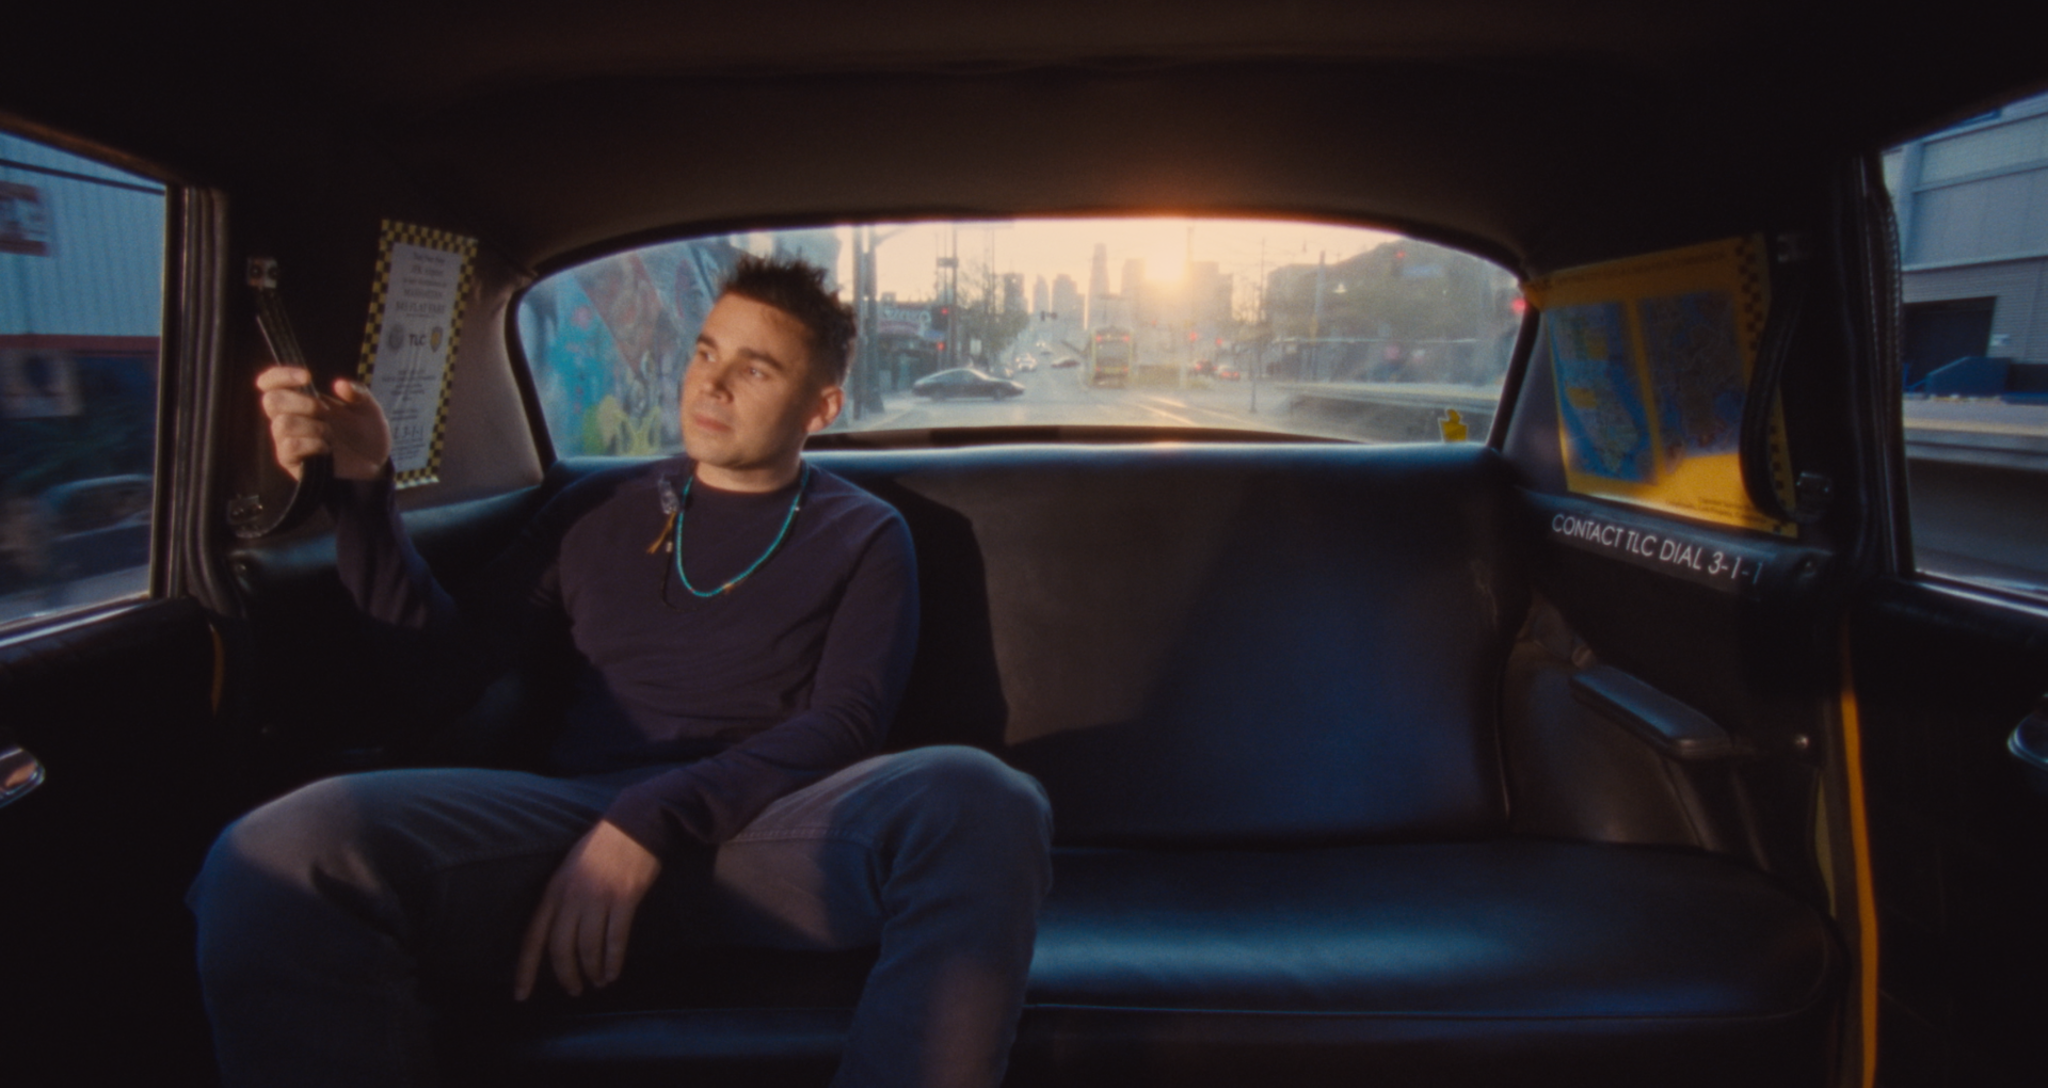 Rostam Shares ‘From the Back of a Cab’ Single and Video Featuring HAIM, Charli XCX and More